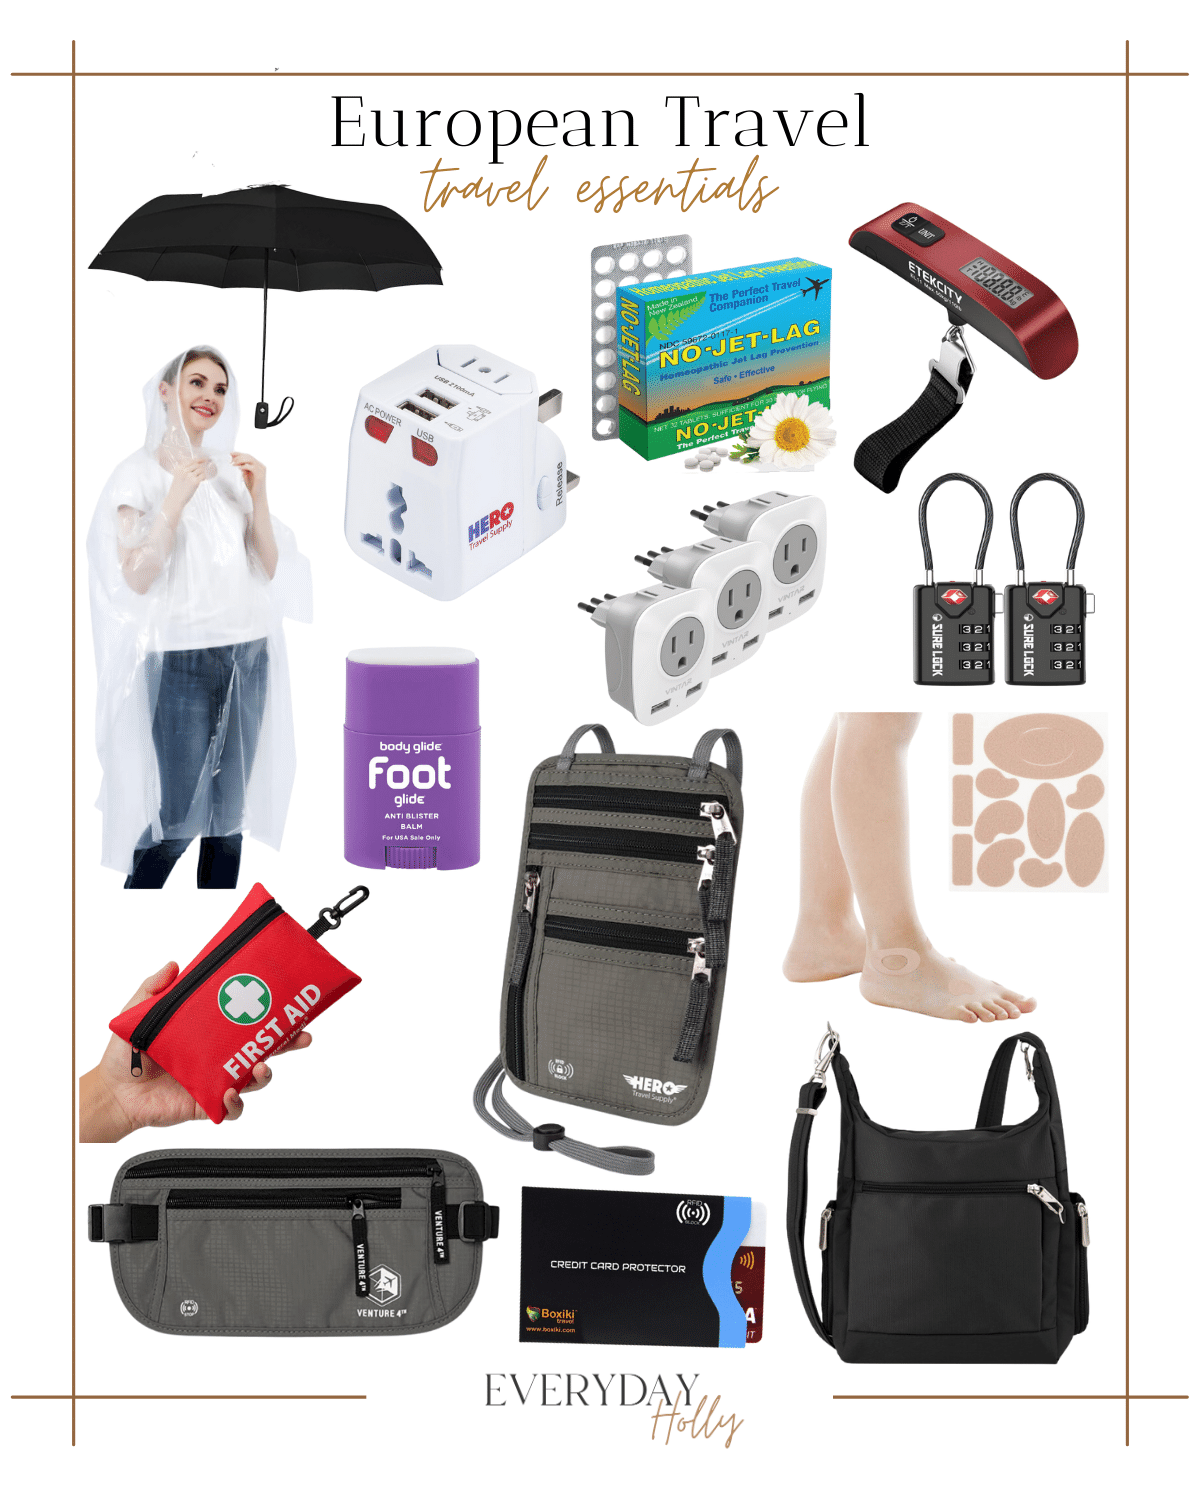 european vacation, traveling essentials, protective gear, protective luggage, traveling esentials, umbrella, outlets, locks, foot protectors, travel bag 